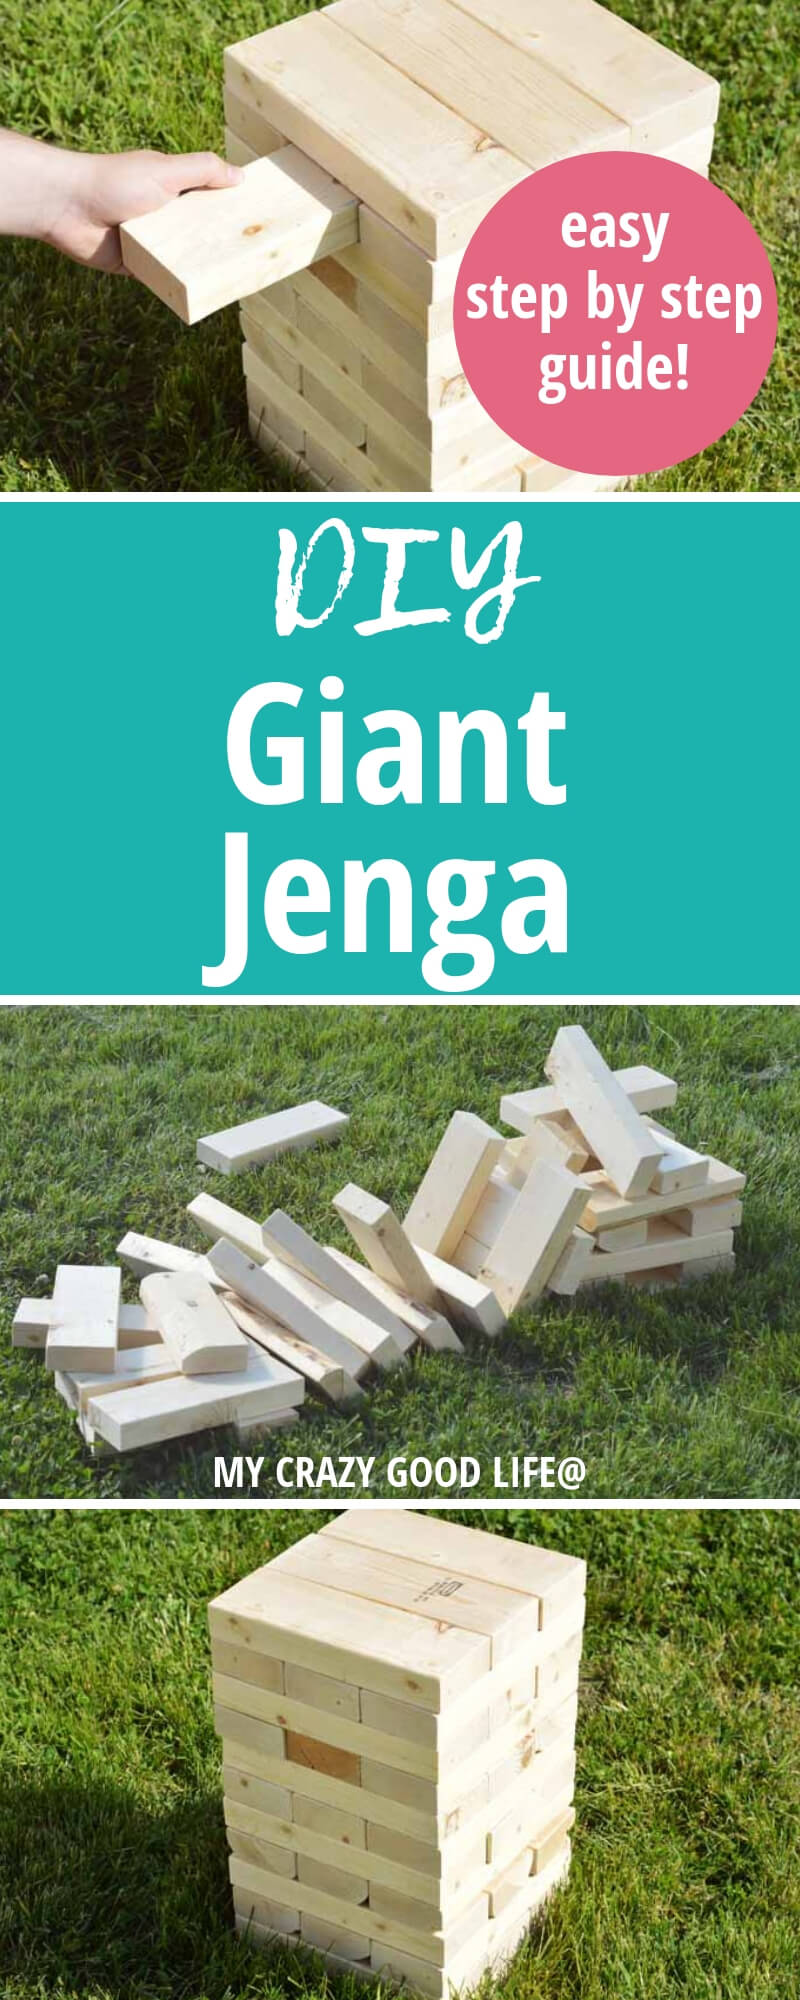 image with text of giant wood jenga game on grass